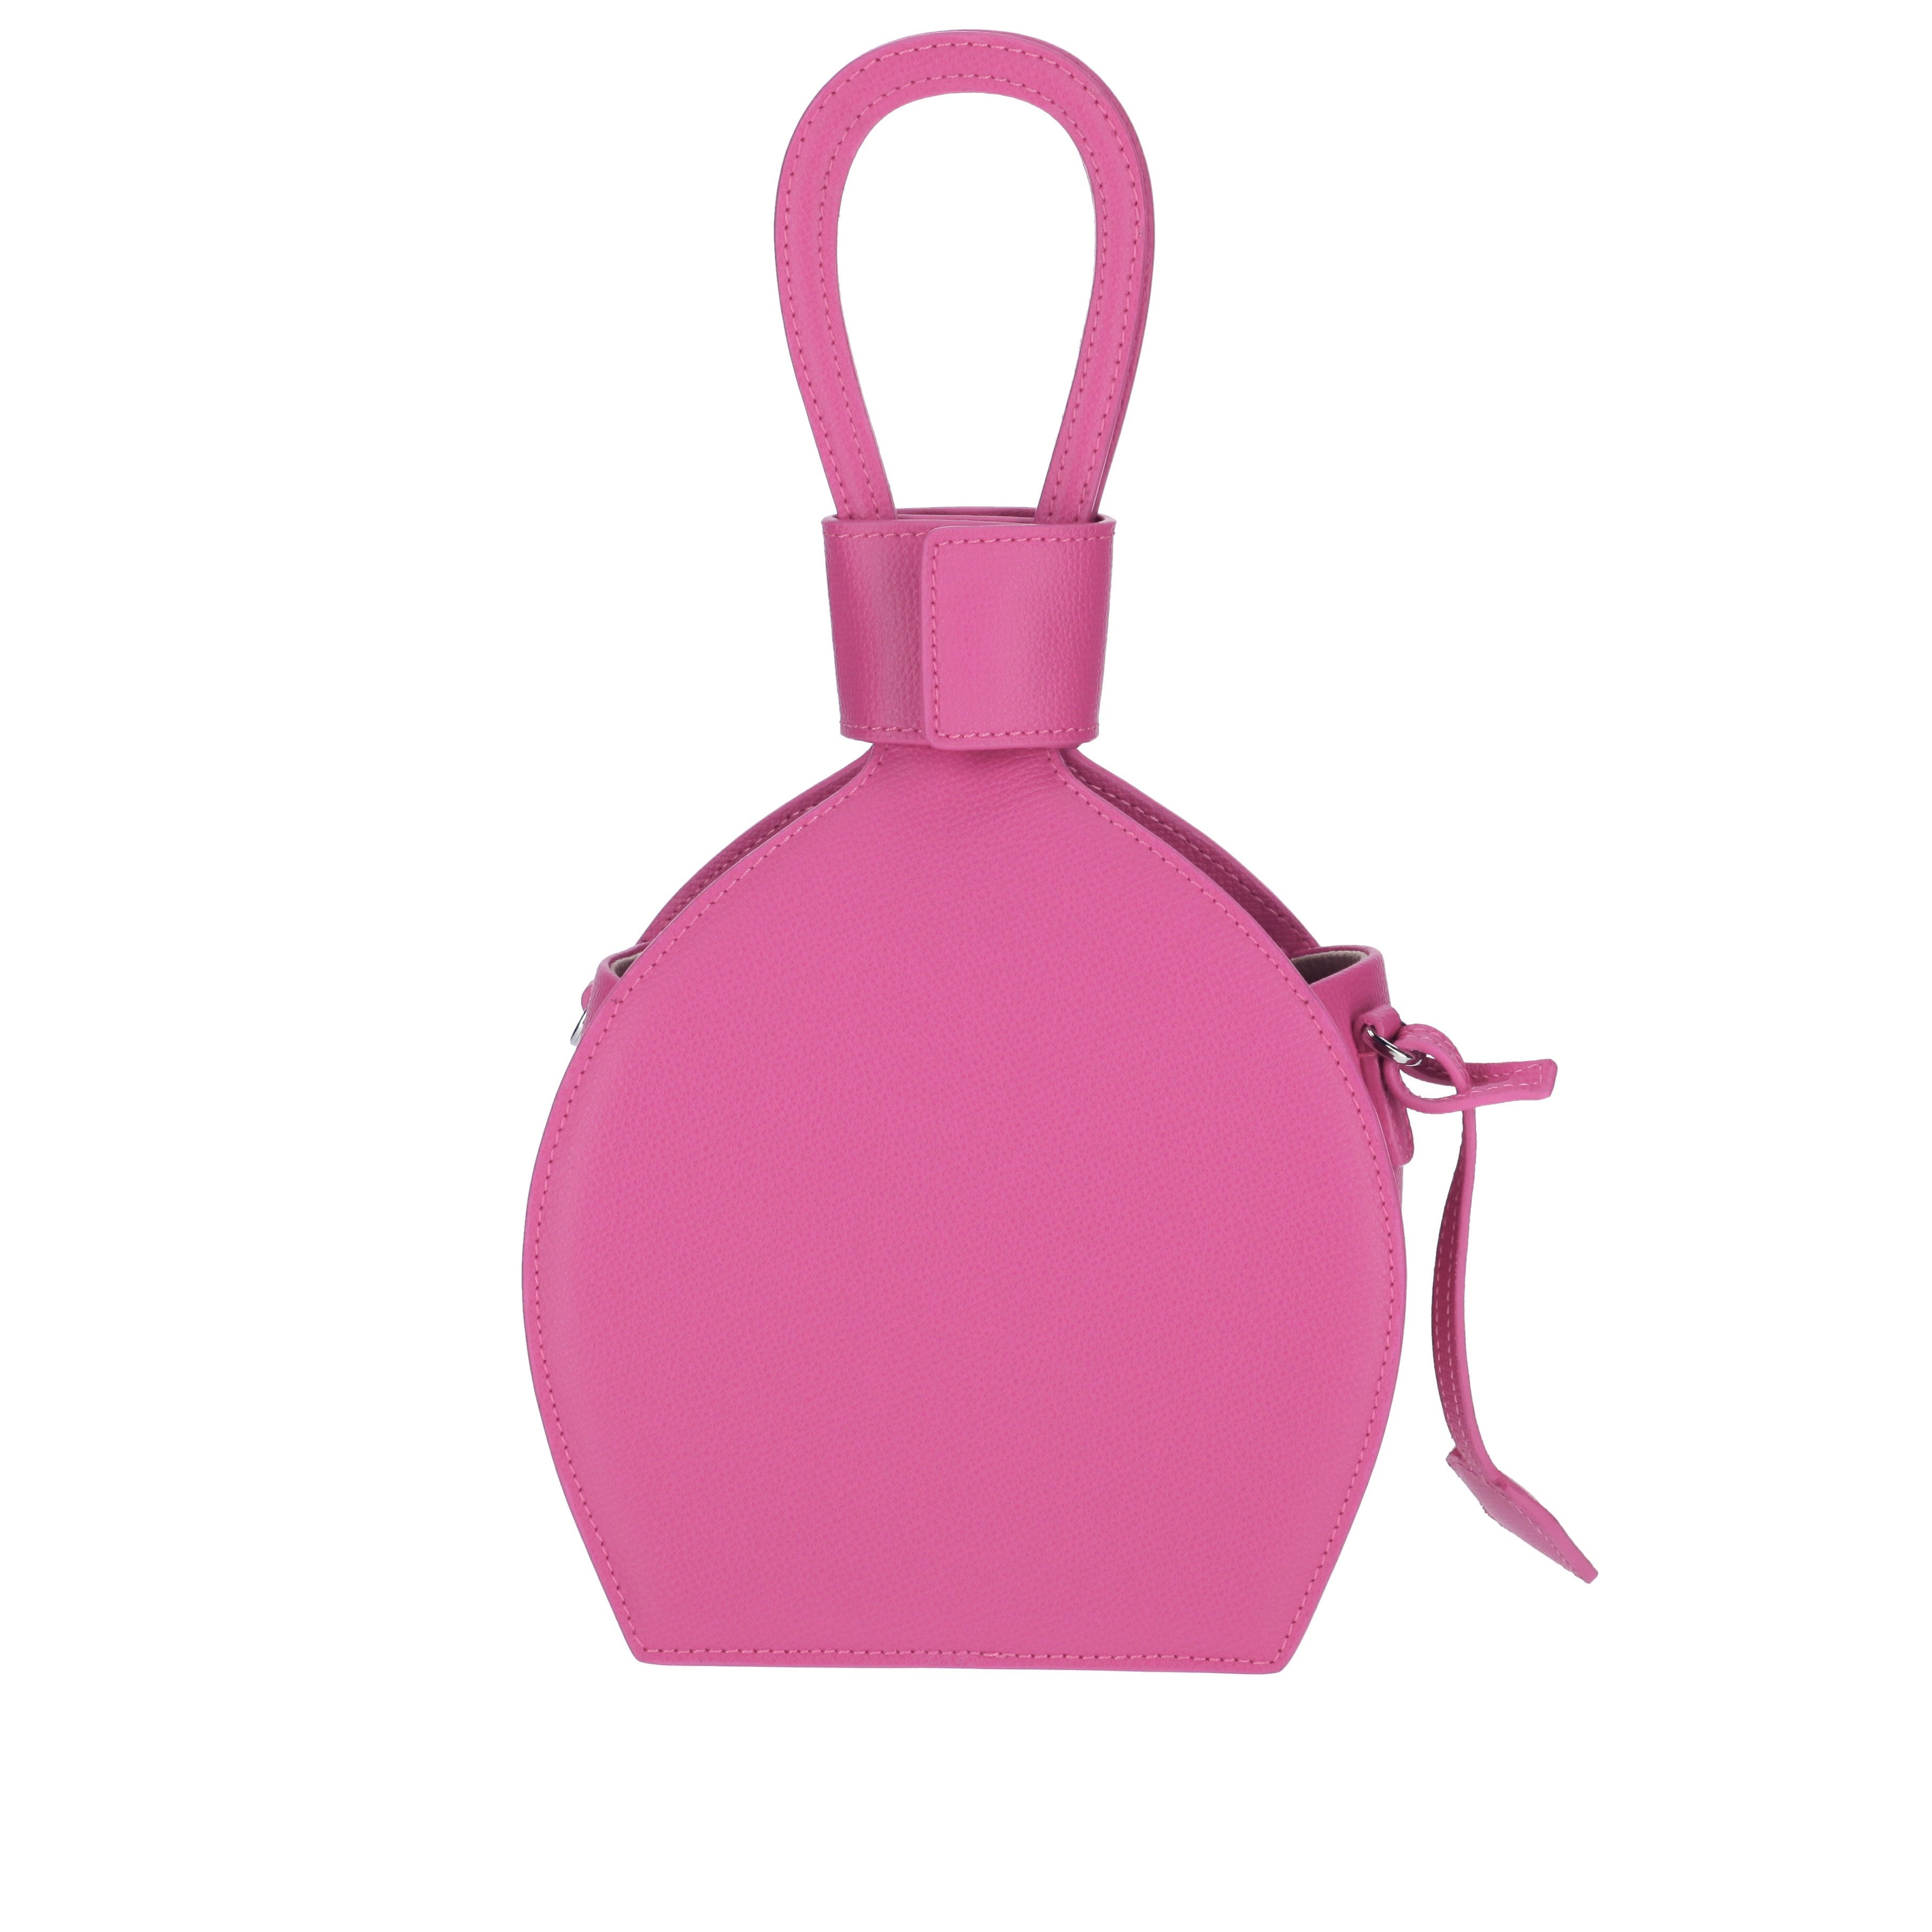 A party bag with ethical leather, ATENA PASSION PURSE-SLING BAG, a hot pink bag, hot pink purse, with minimalist look from MDLR